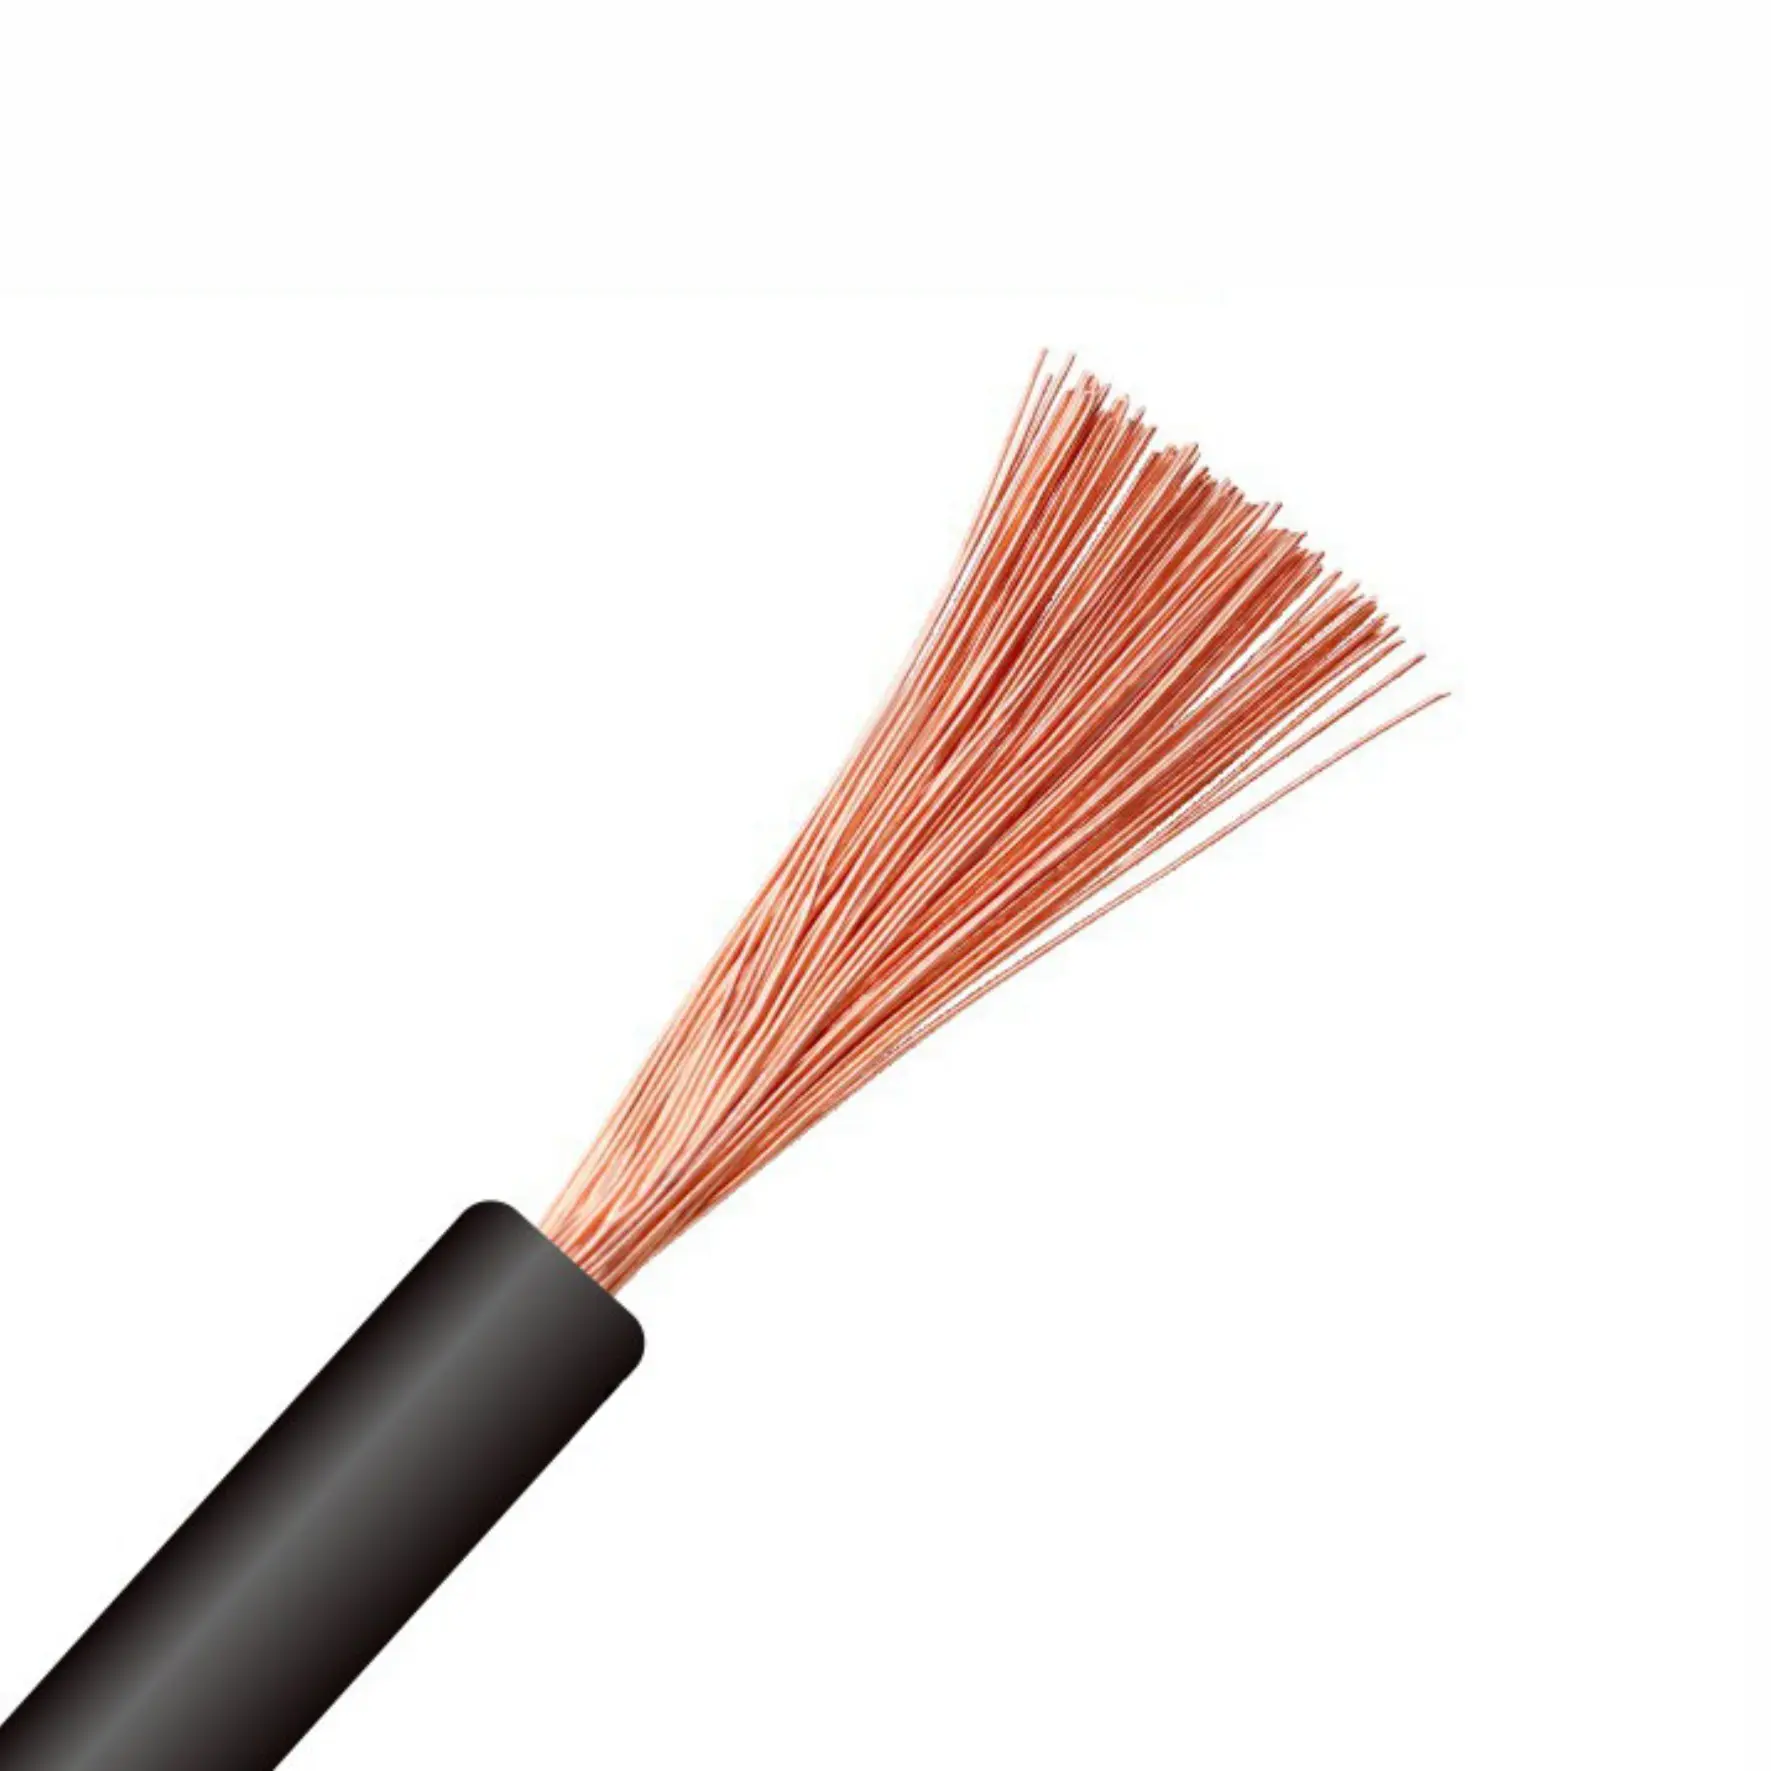 Factory single core RV Electrical Power copper conductor cables and wires supplies 1x2.5mm electric wire cable for house wiring